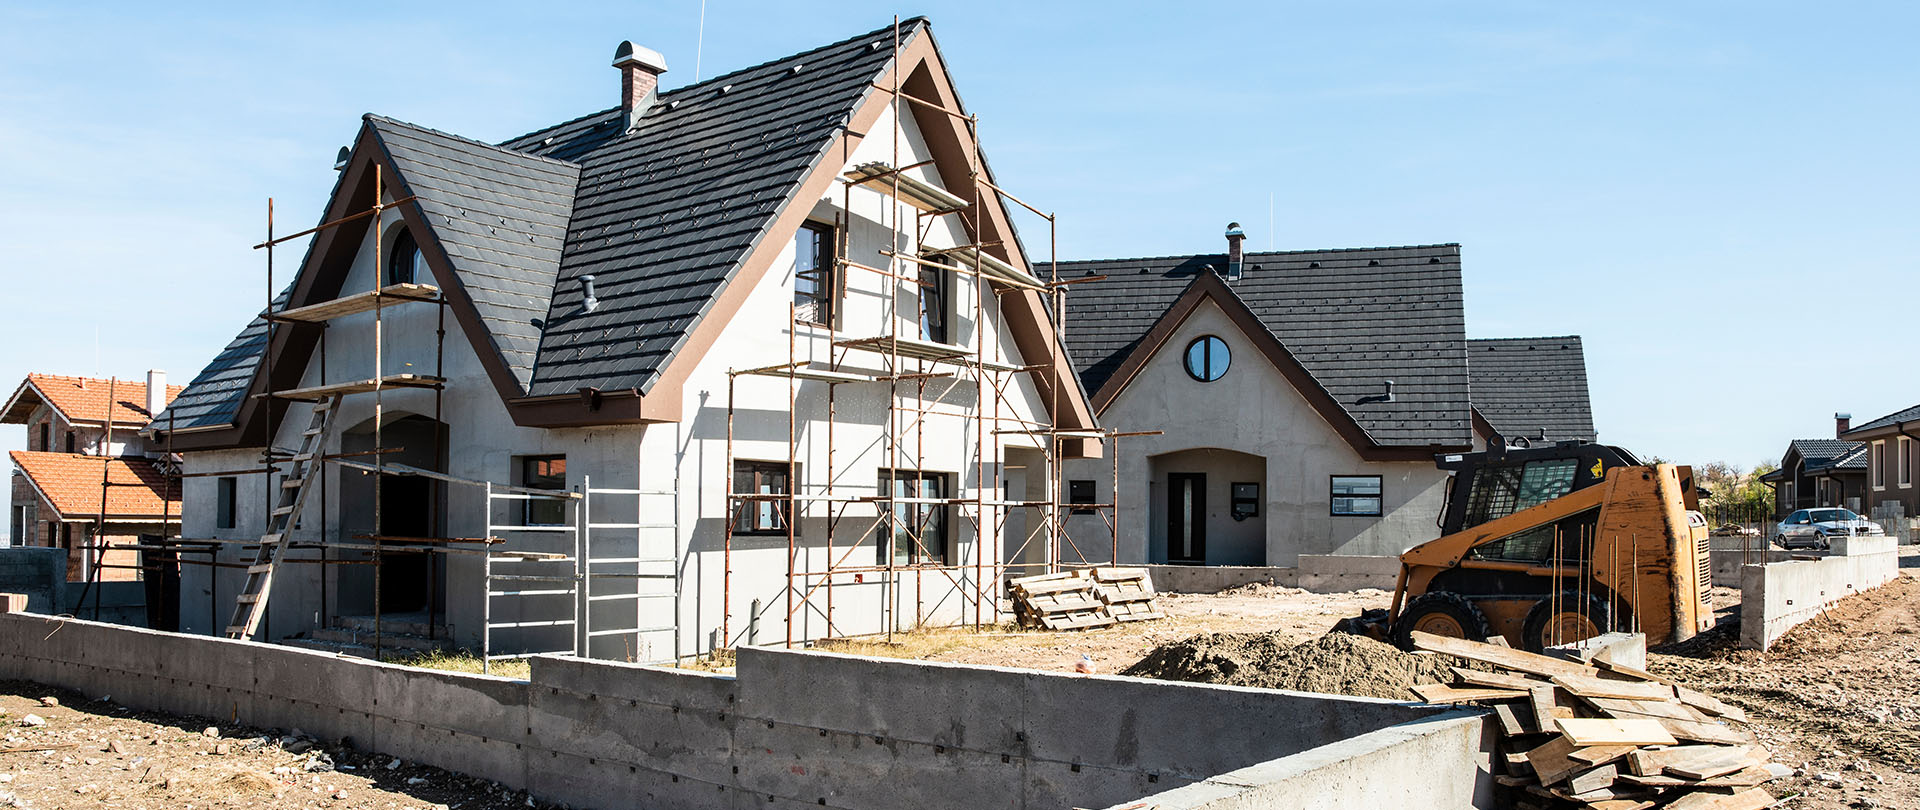 New Home Construction and Transformation Additions for Your Home!